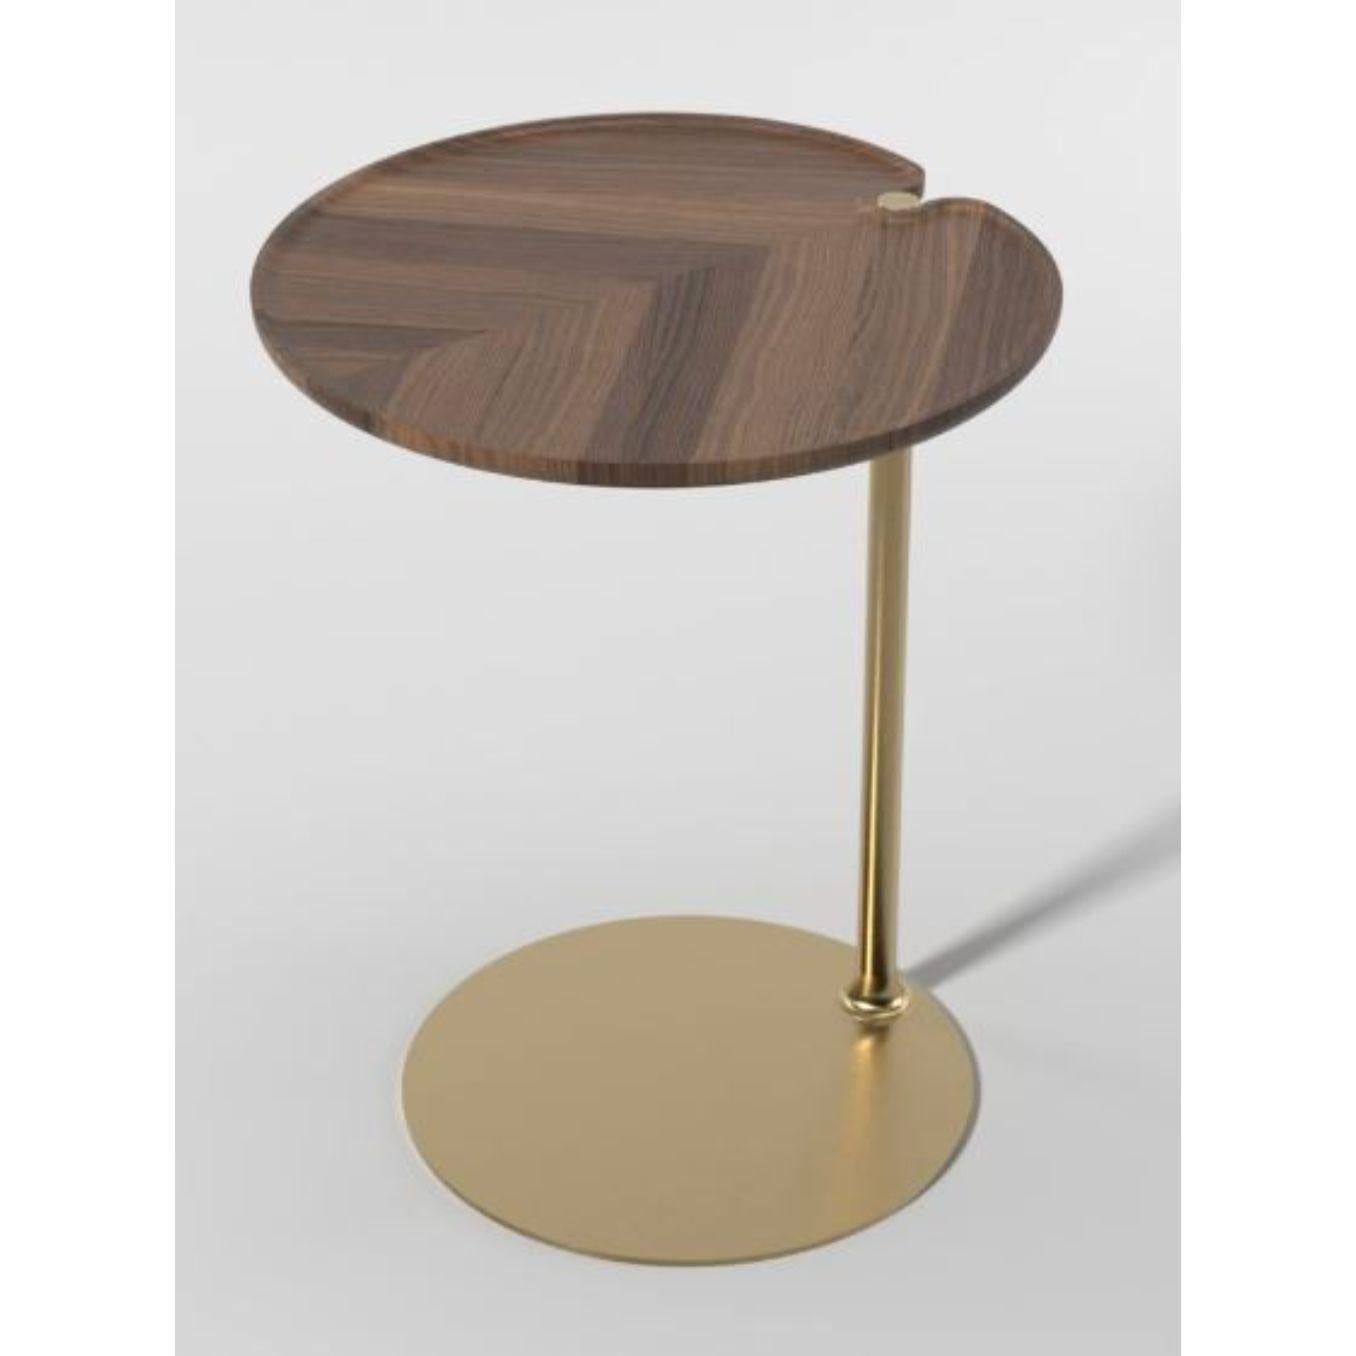 Leaf 1 round side table by Mathias De Ferm
Dimensions: D 42.5 x W 44 x H 55.5 cm
Materials: Walnut wood, brass.
Also available in different materials. 
 
LEAF-shaped walnut/oak tabletops revolve around a sleek brass base with a carefully